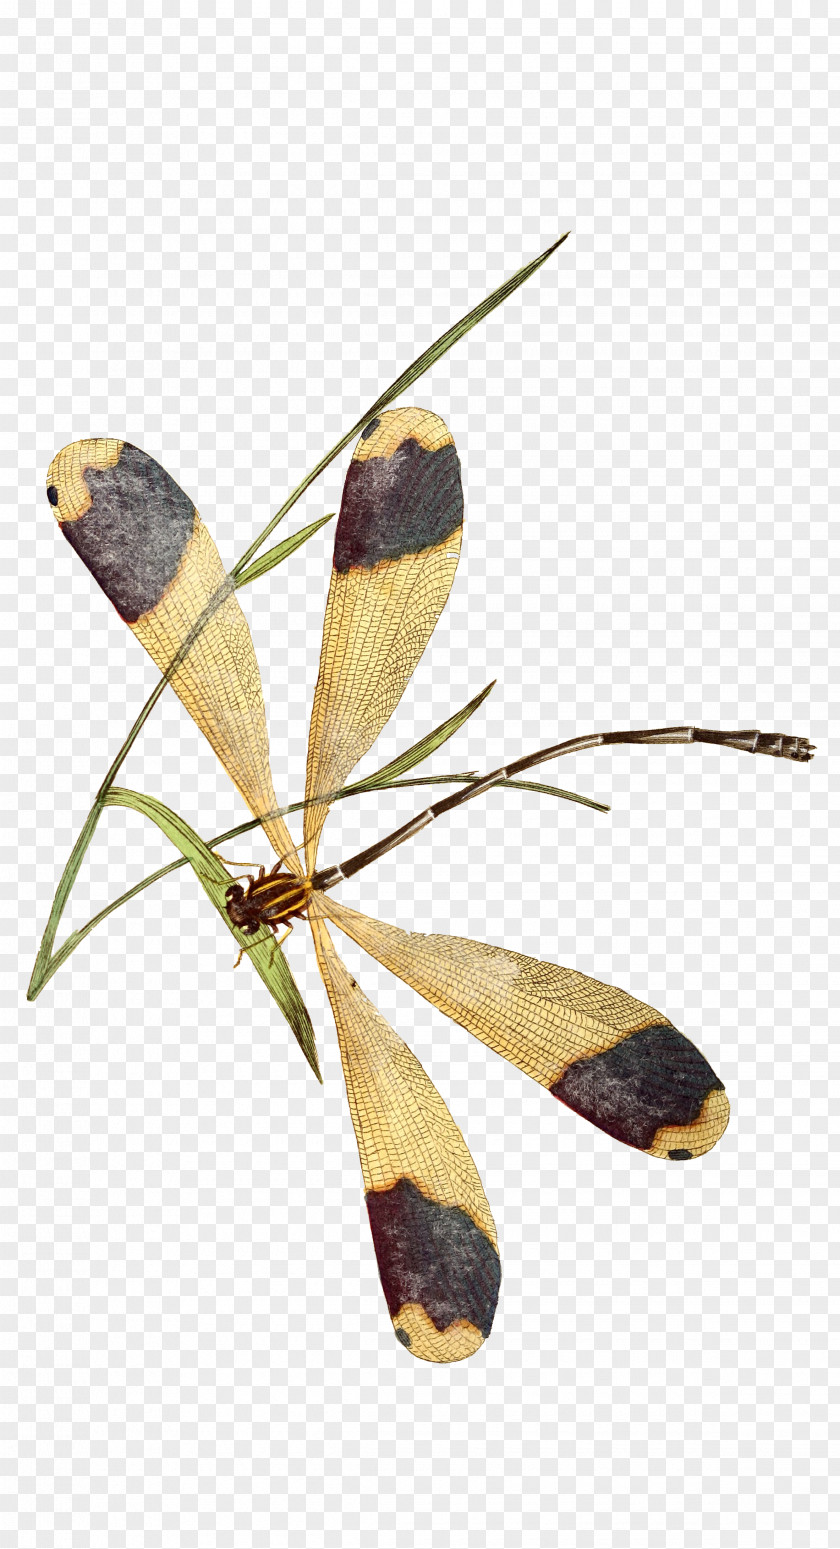 Insect Butterfly Dragonfly Image Animation PNG